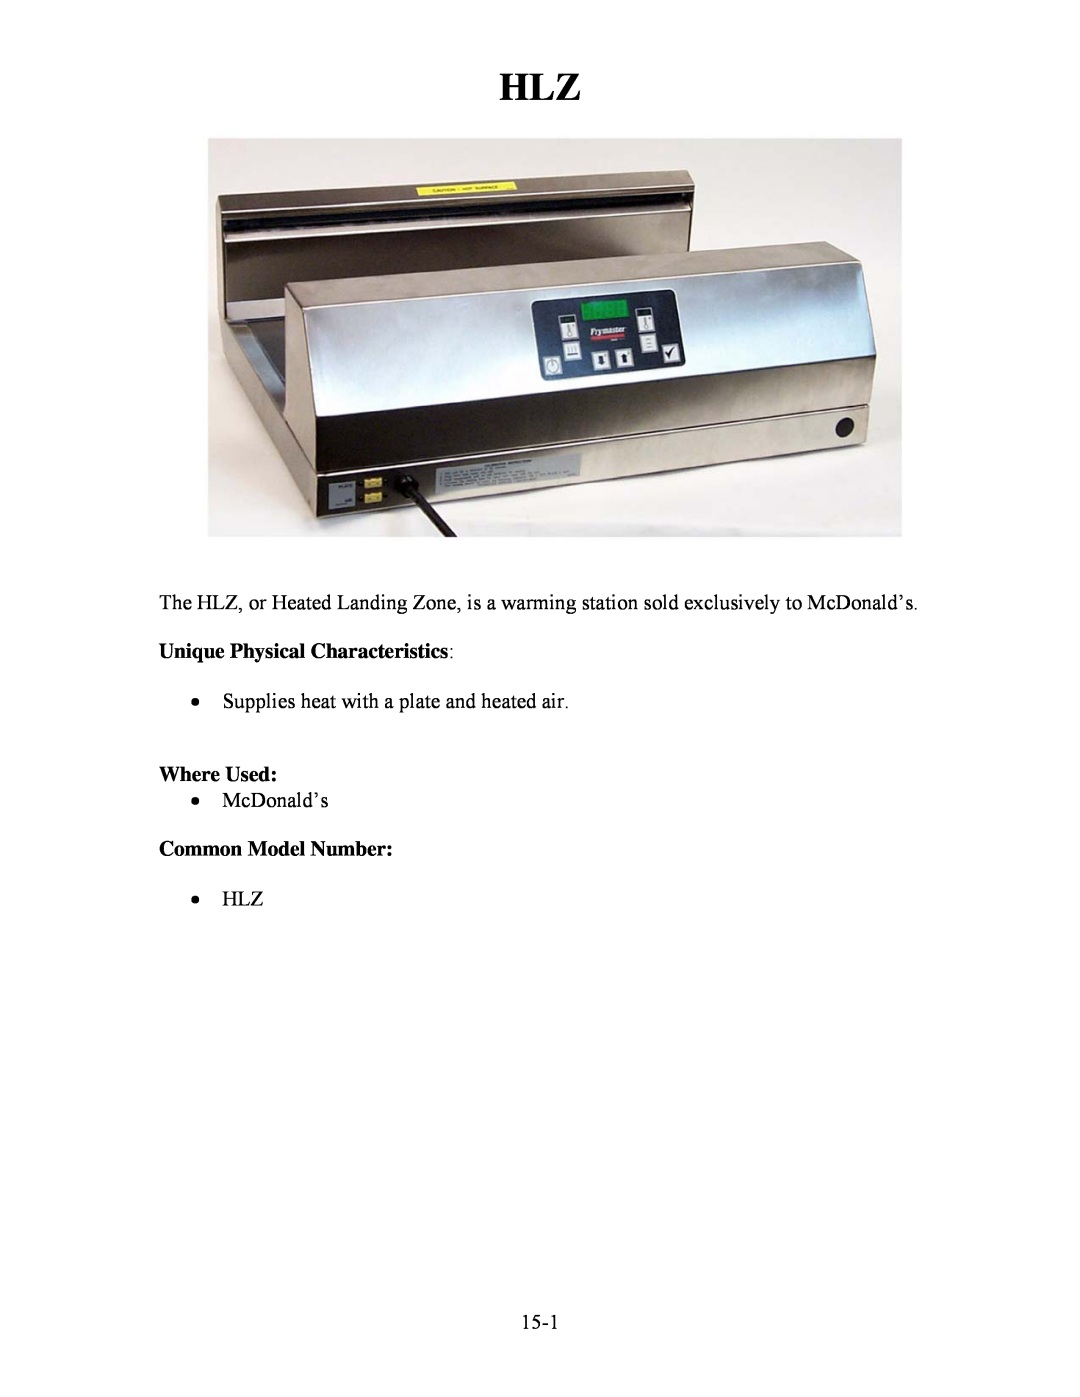 Frymaster H50 manual Supplies heat with a plate and heated air, McDonald’s, 15-1, Where Used, Common Model Number 